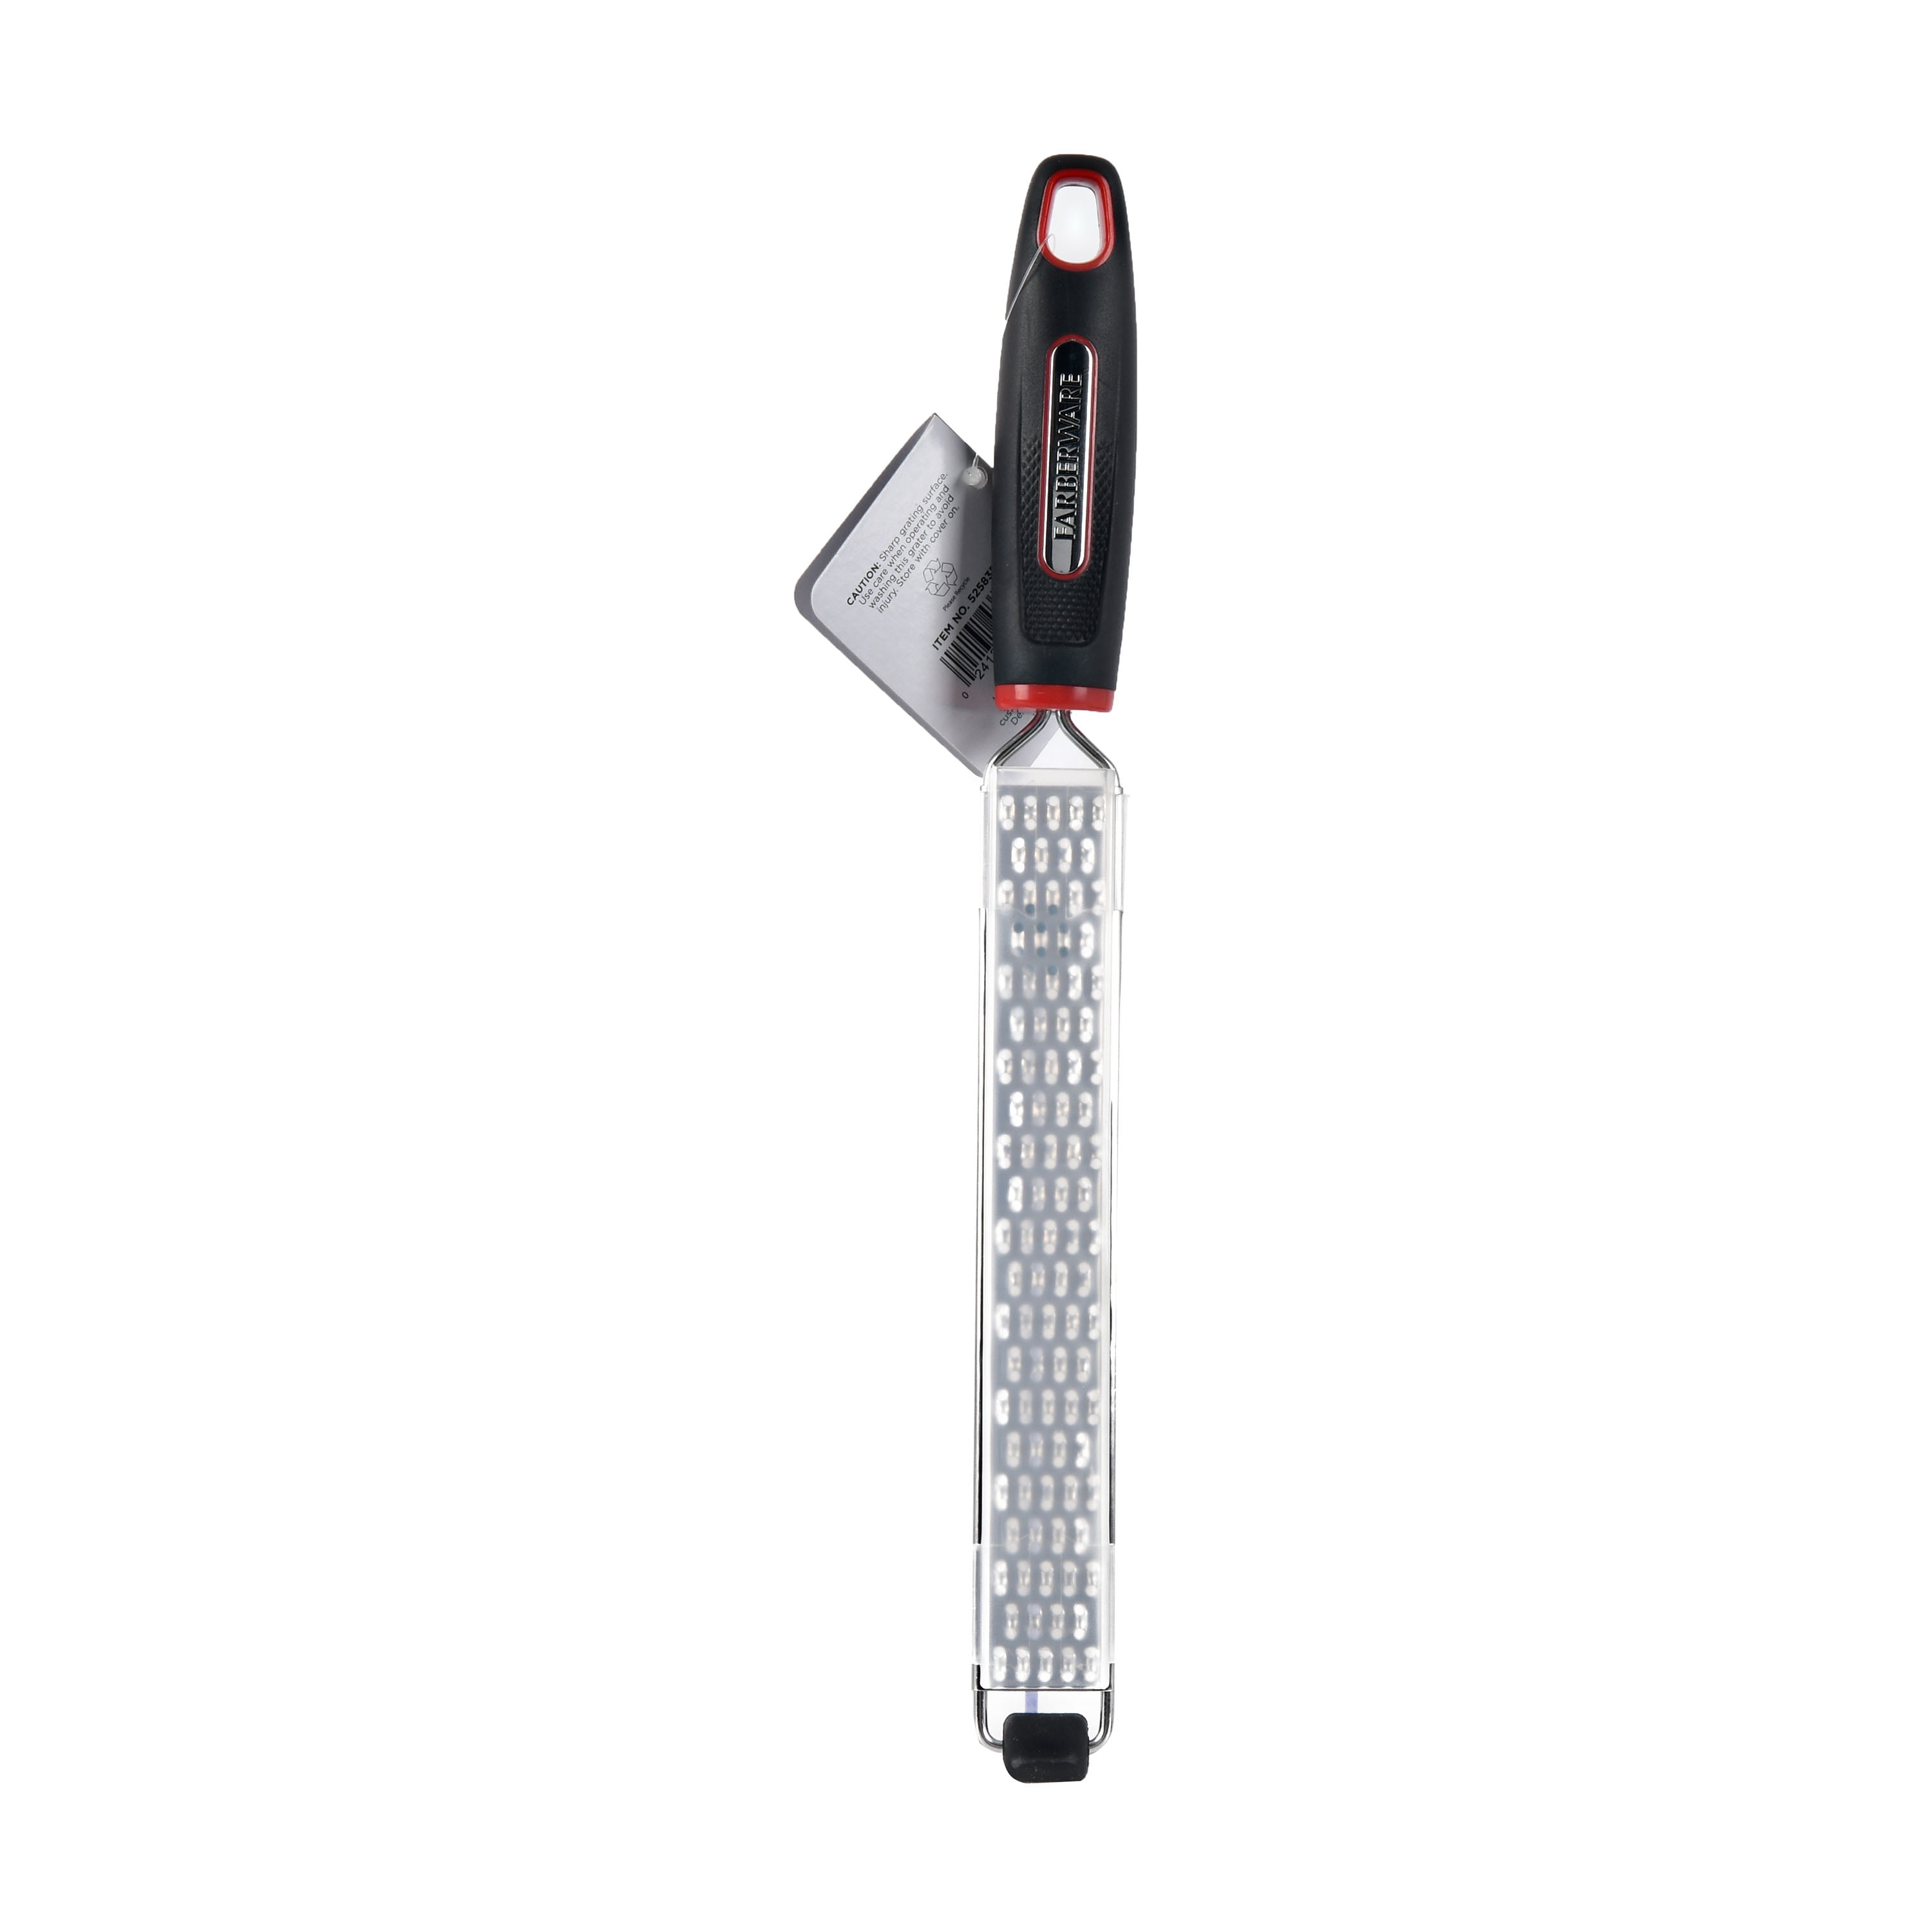 Farberware 1.6 in x 7.65 in Soft Grip Ceramic Blade Peeler Black with Red  Accents 